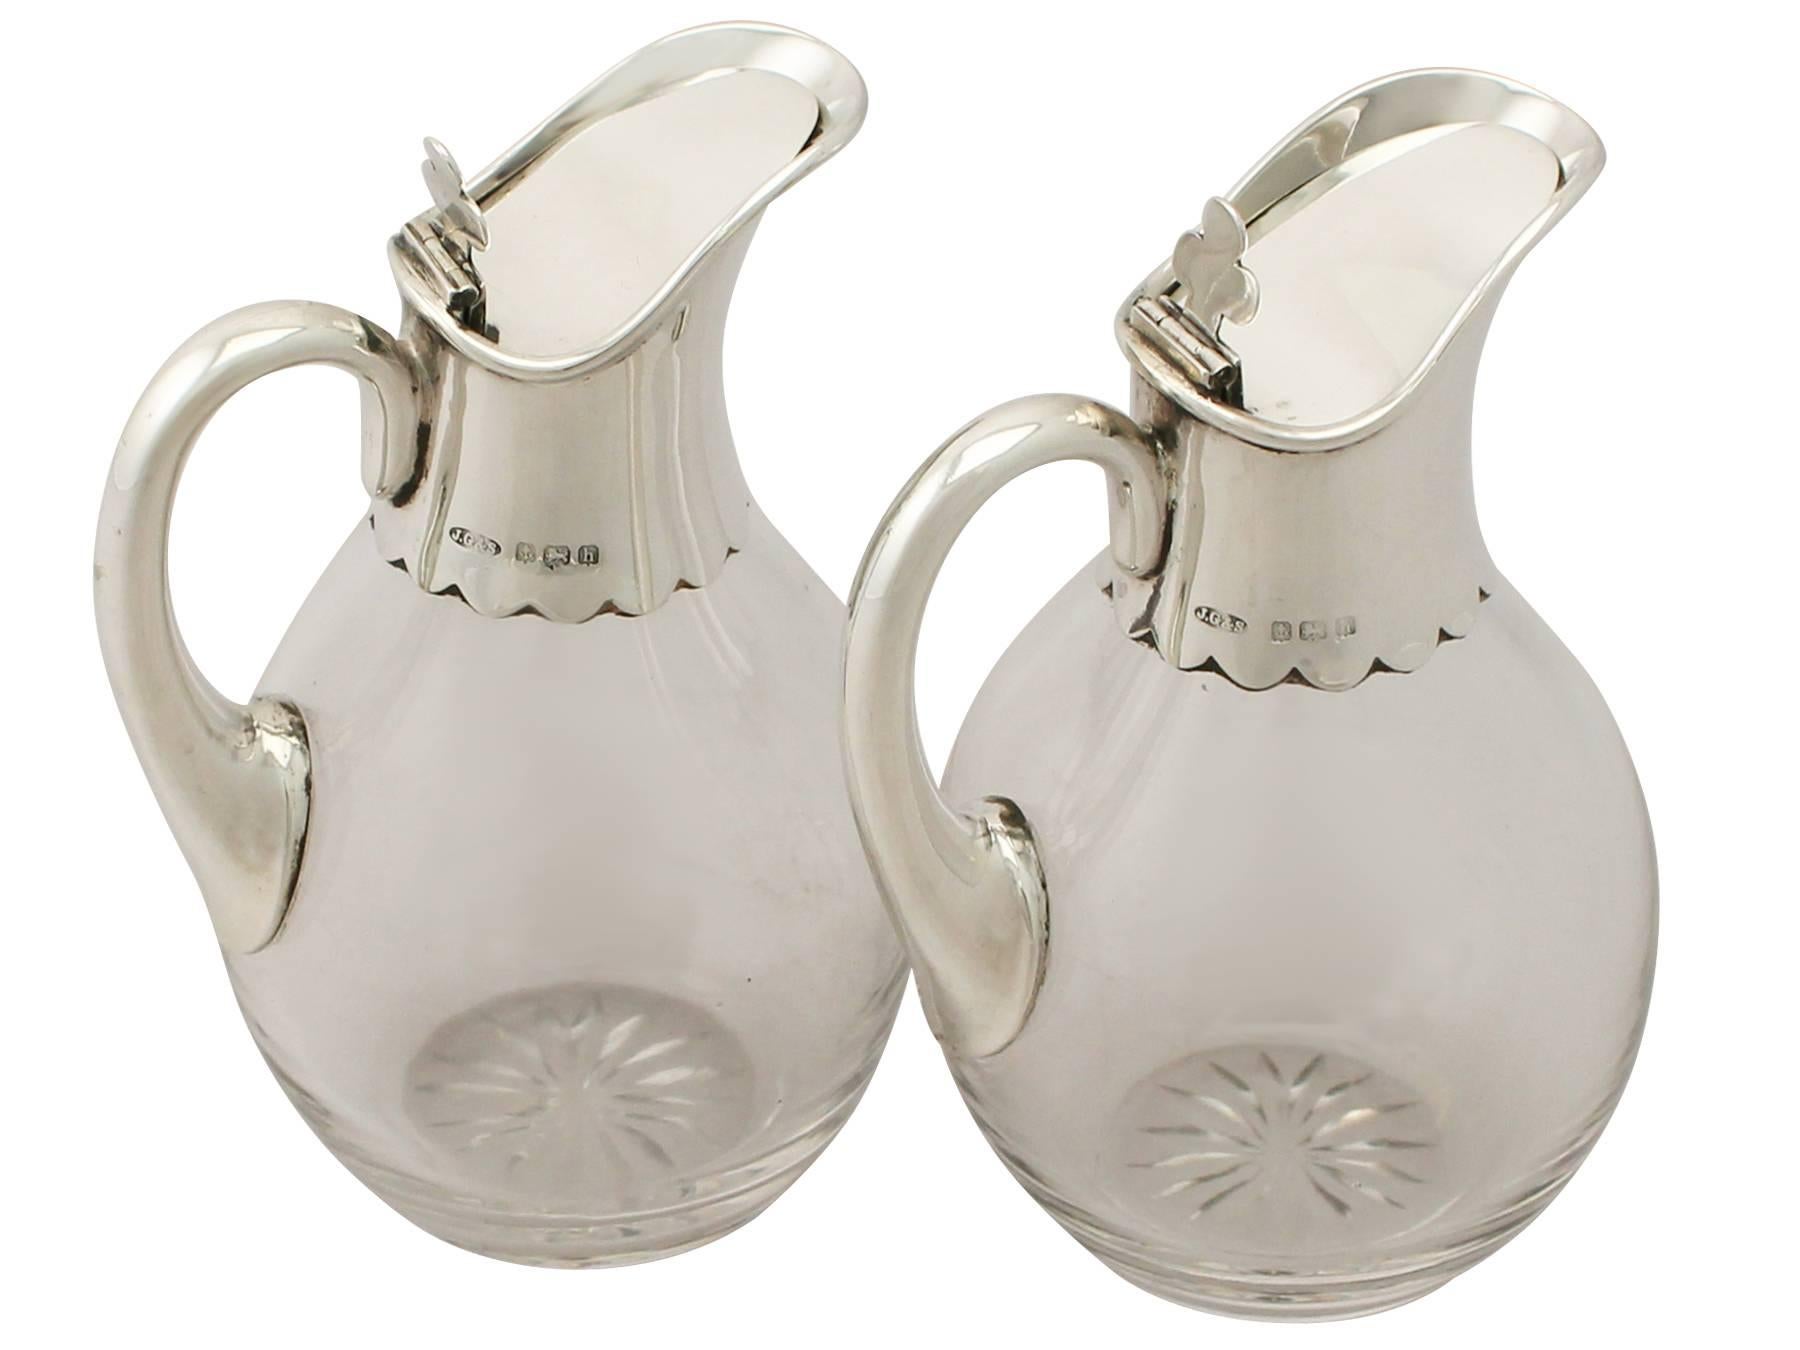 English Glass and Sterling Silver Mounted Whiskey Jugs, Antique Edwardian